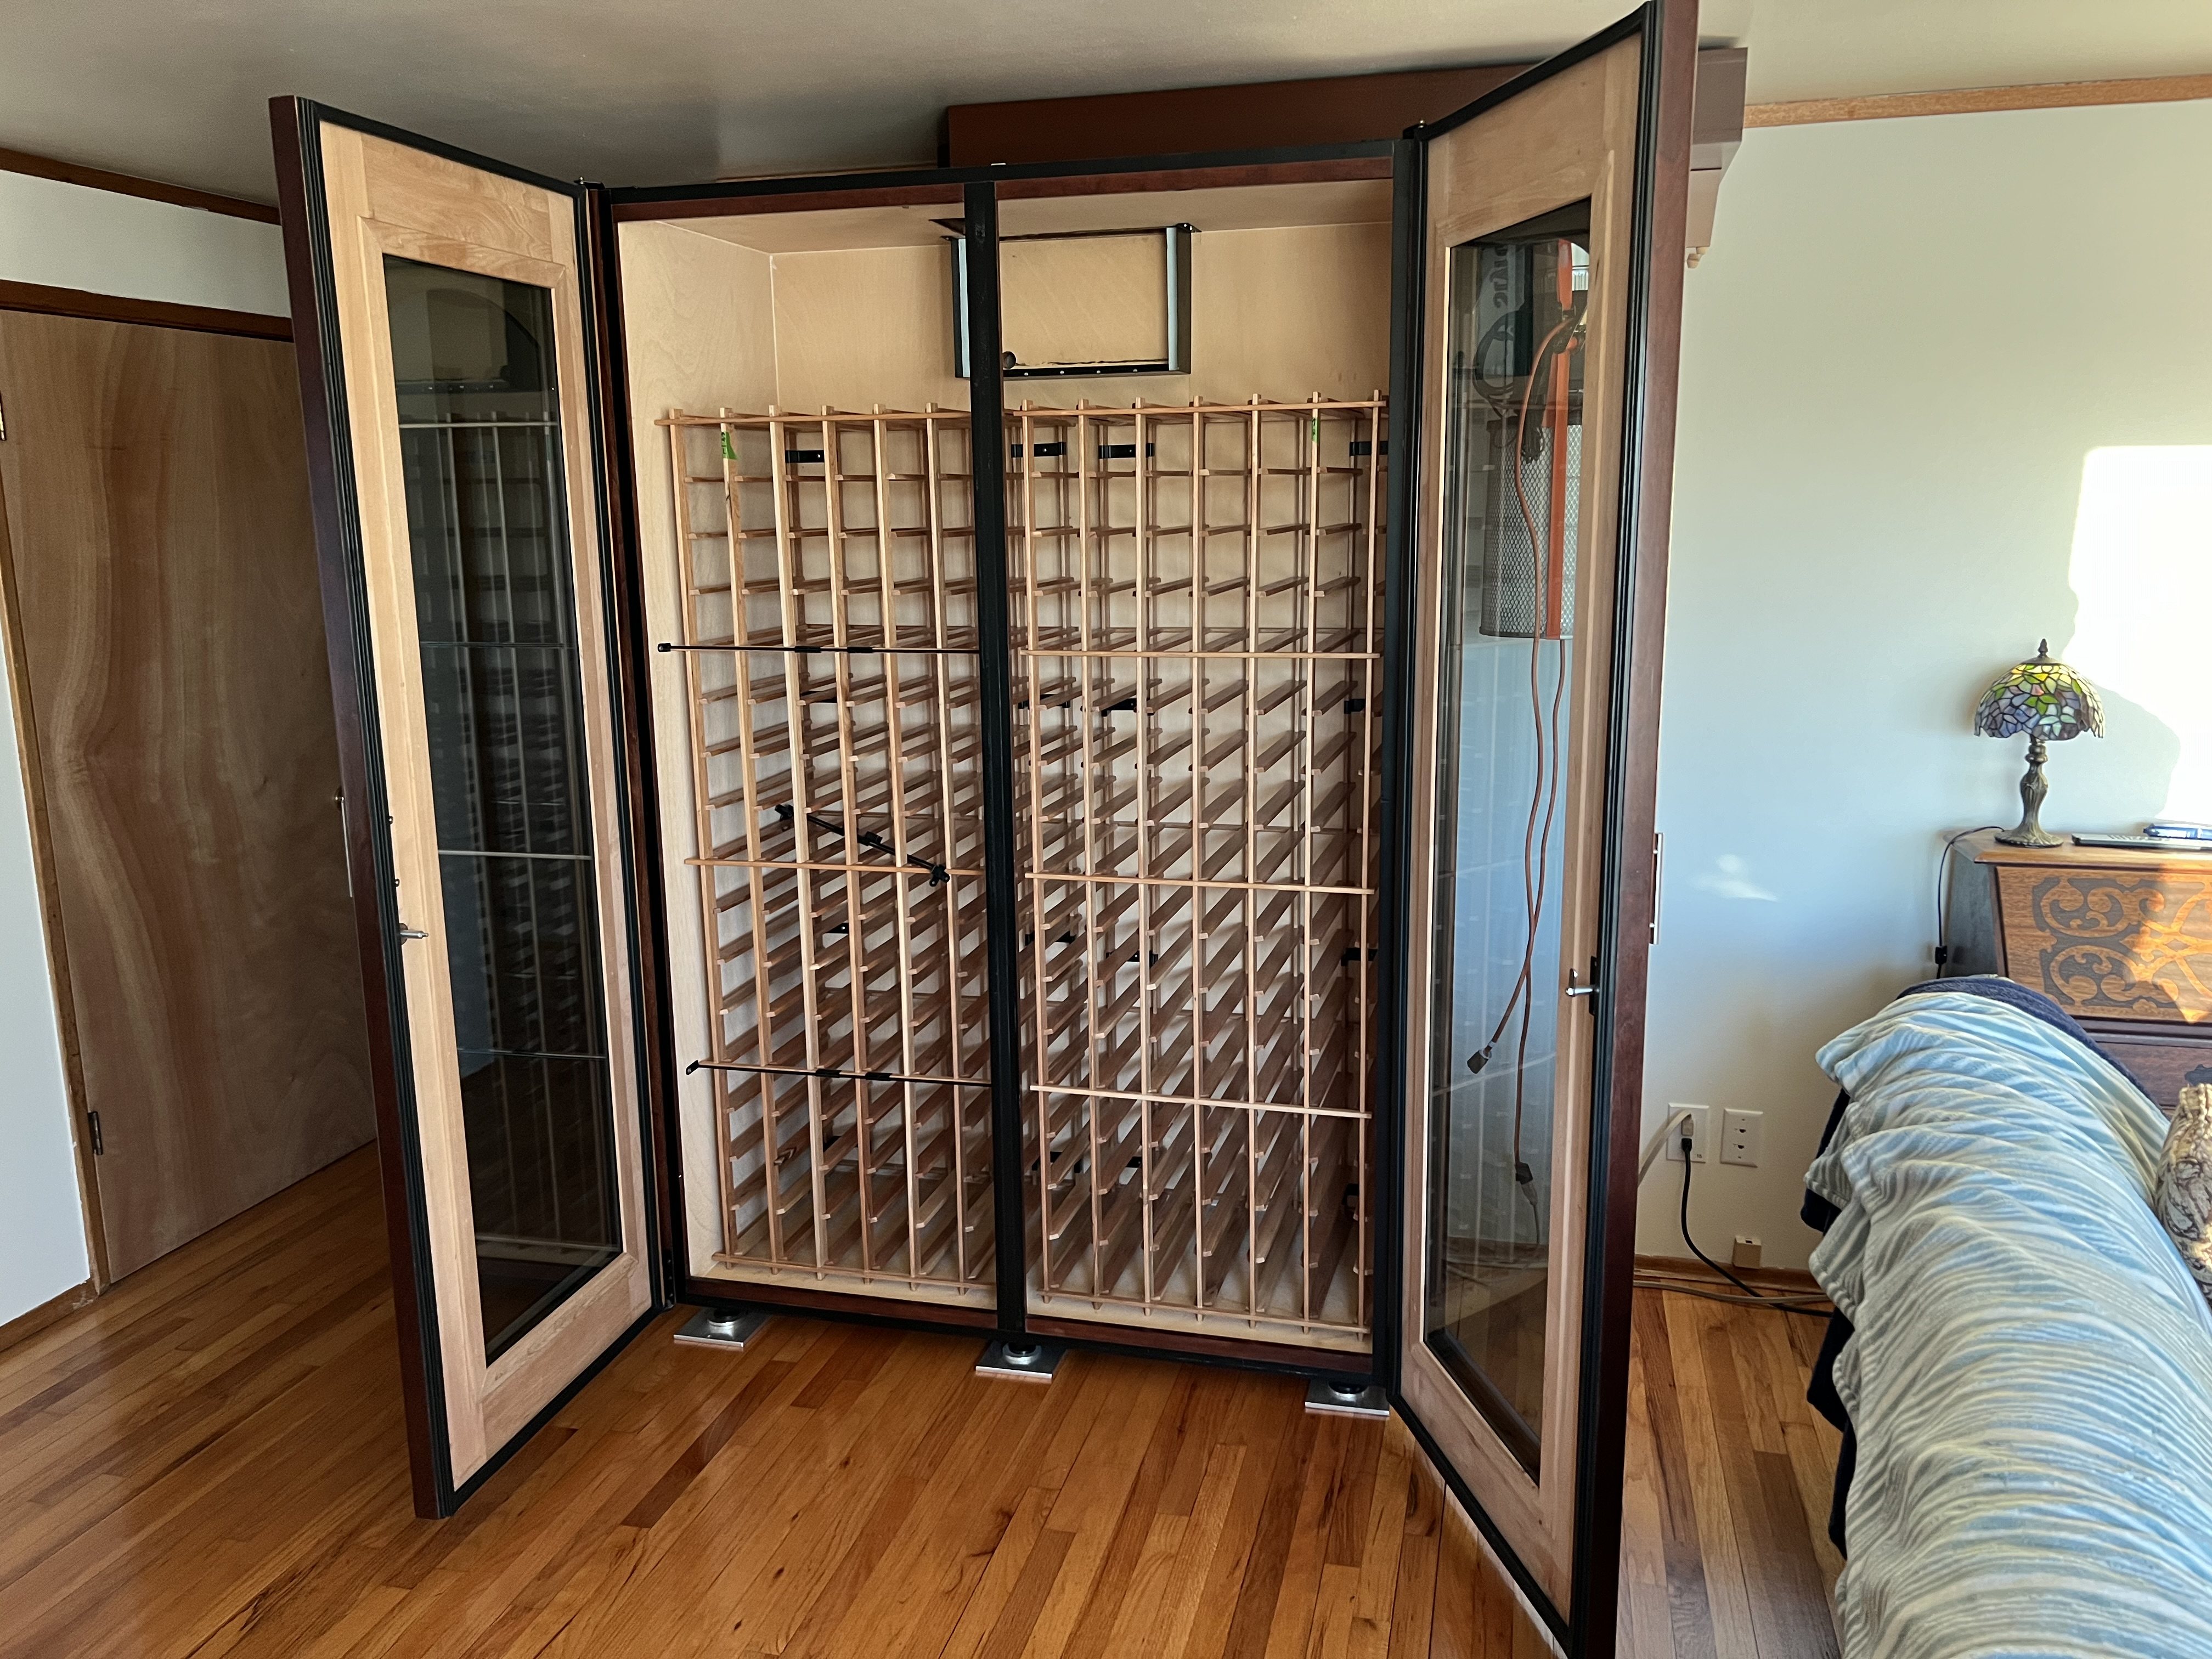 Wine racks fastened in place, after years!